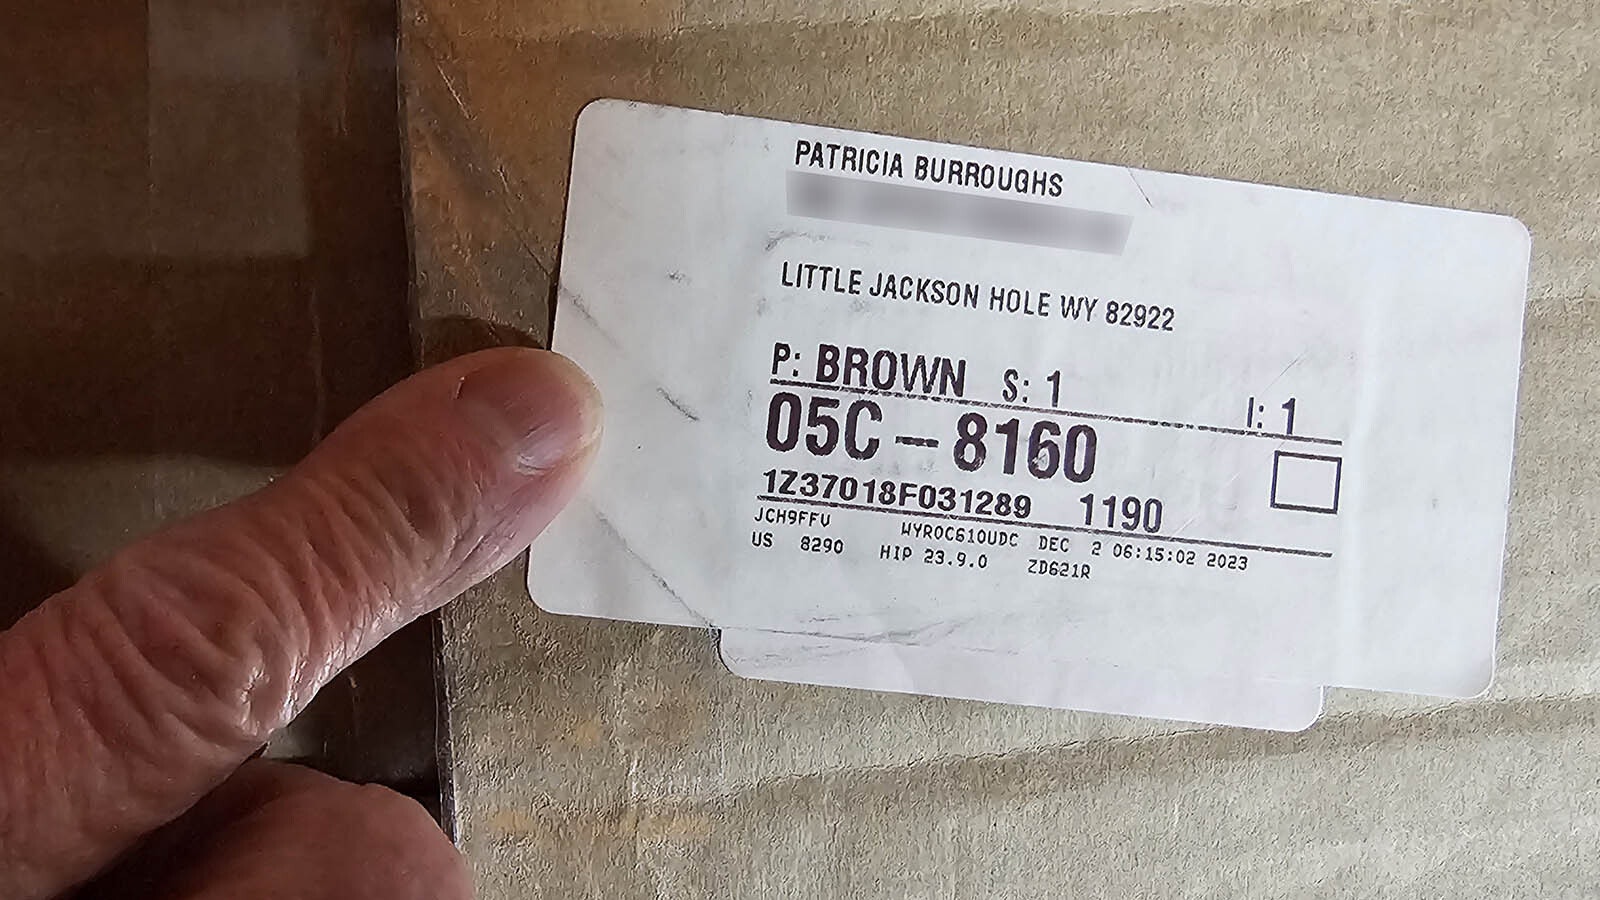 Pat Burroughs points to the Little Jackson Hole address on a package she recently received.